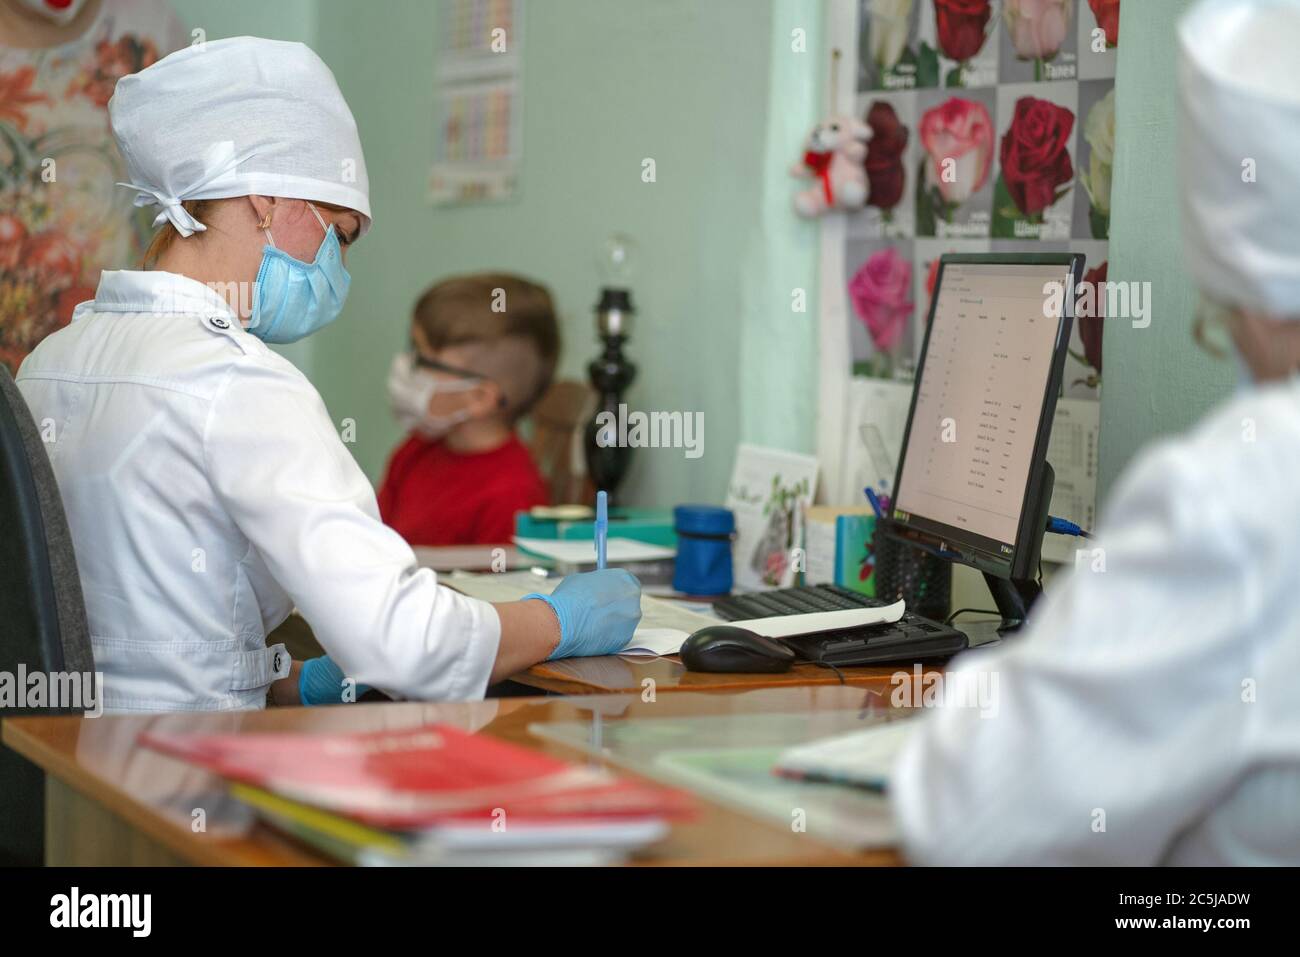 Doctor makes notes on card of little patient after examination, recording appointment and results. Masked woman and boy due to virus outbreak and Stock Photo